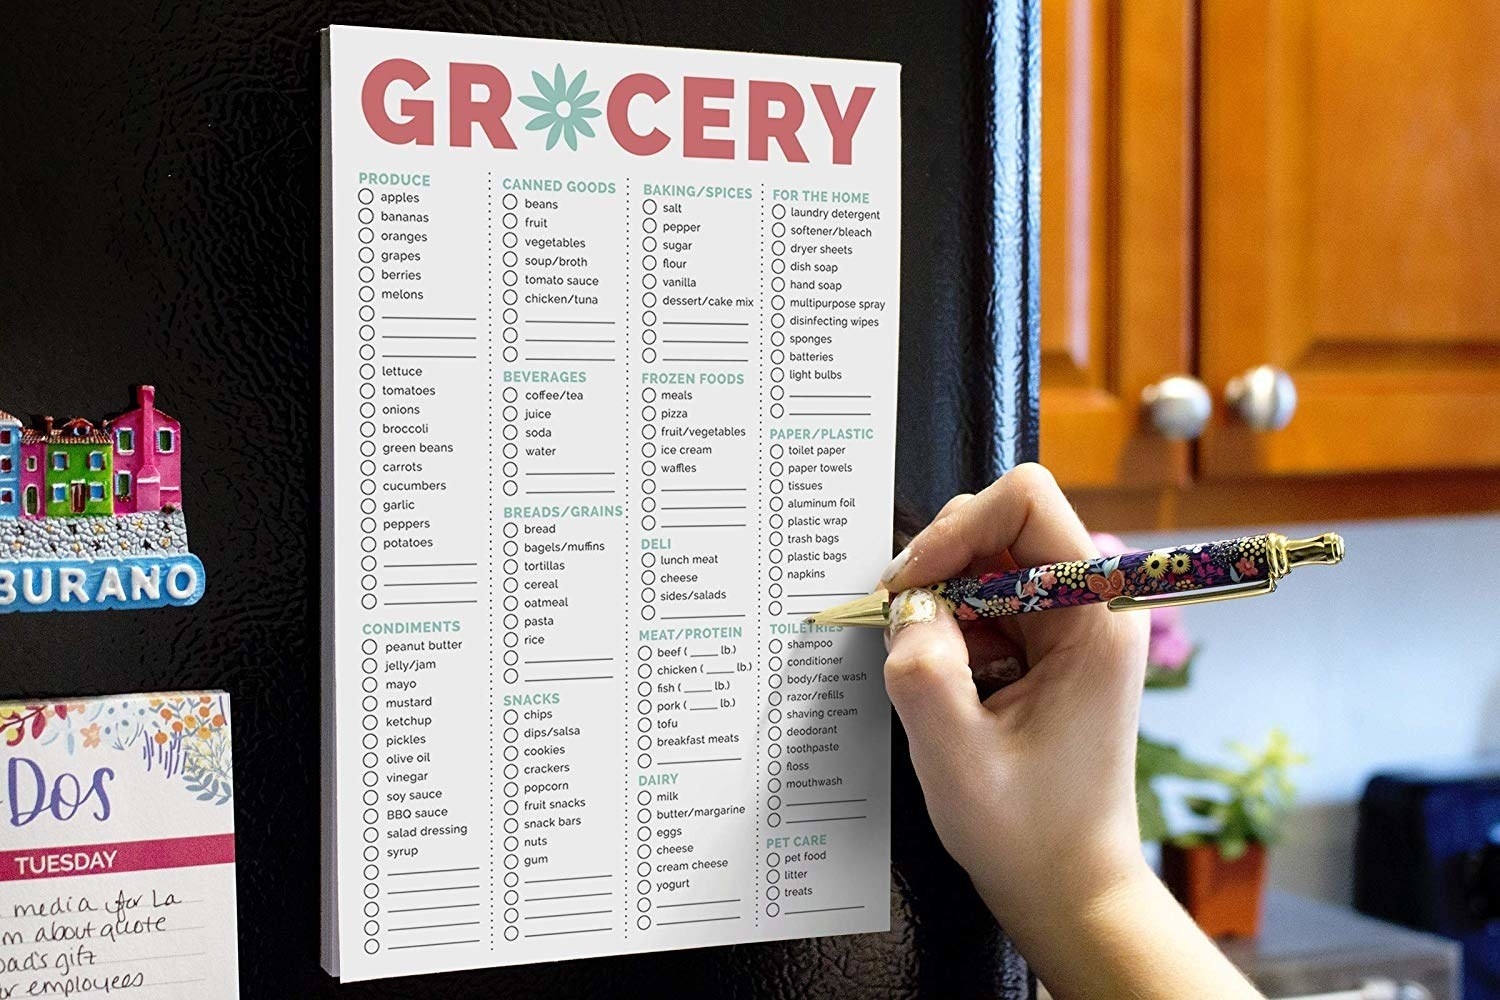 a model checks of items on the pre-filled grocery list